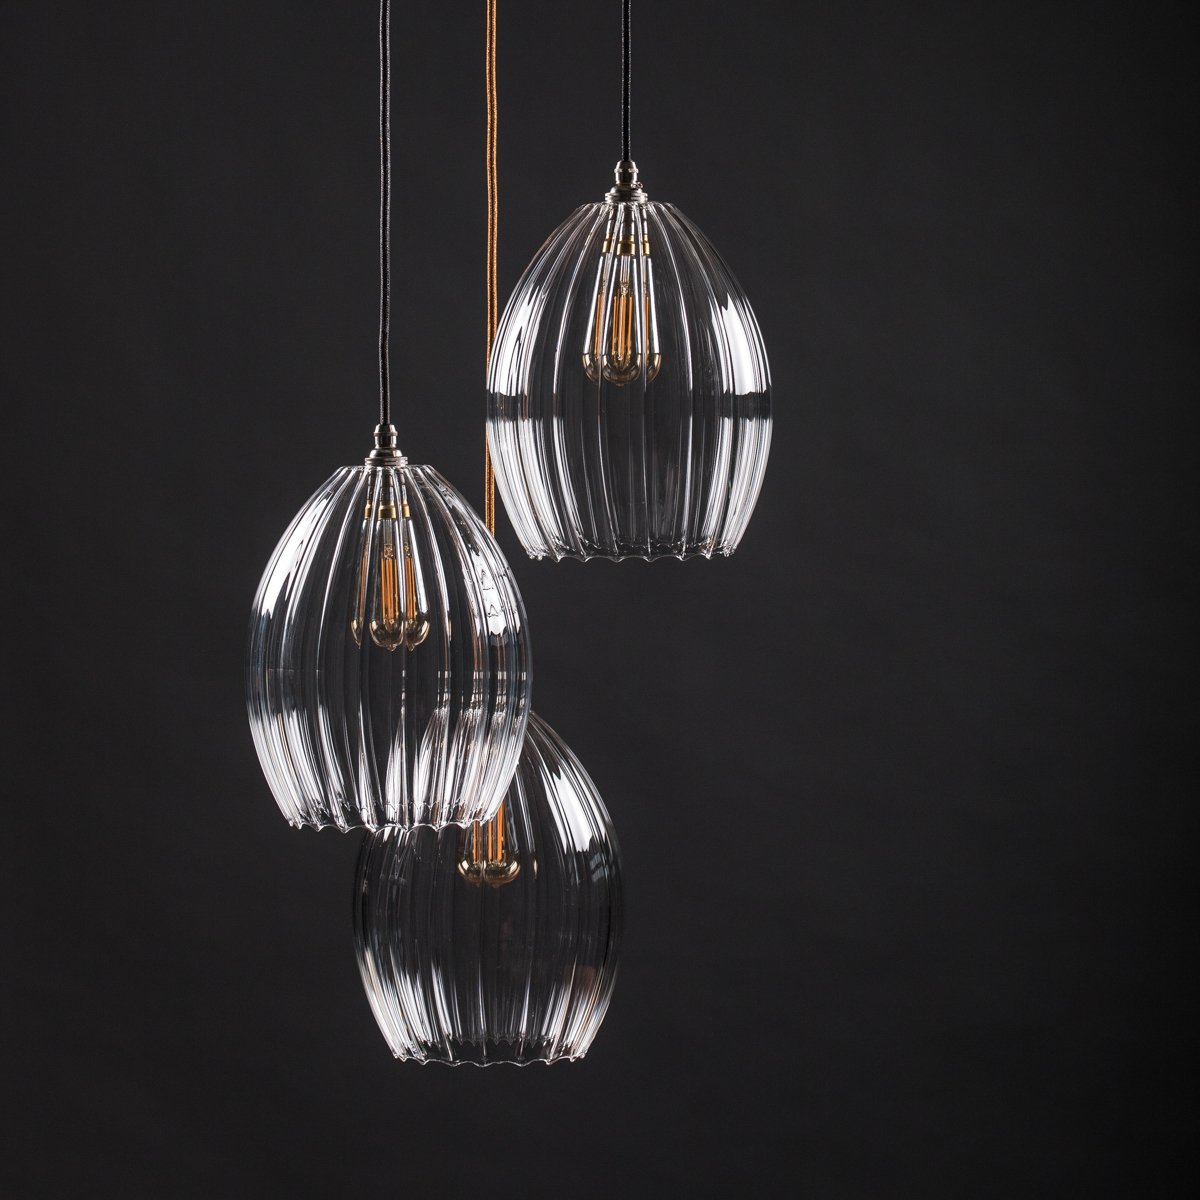 Image of Molly large 3 way cluster pendant light